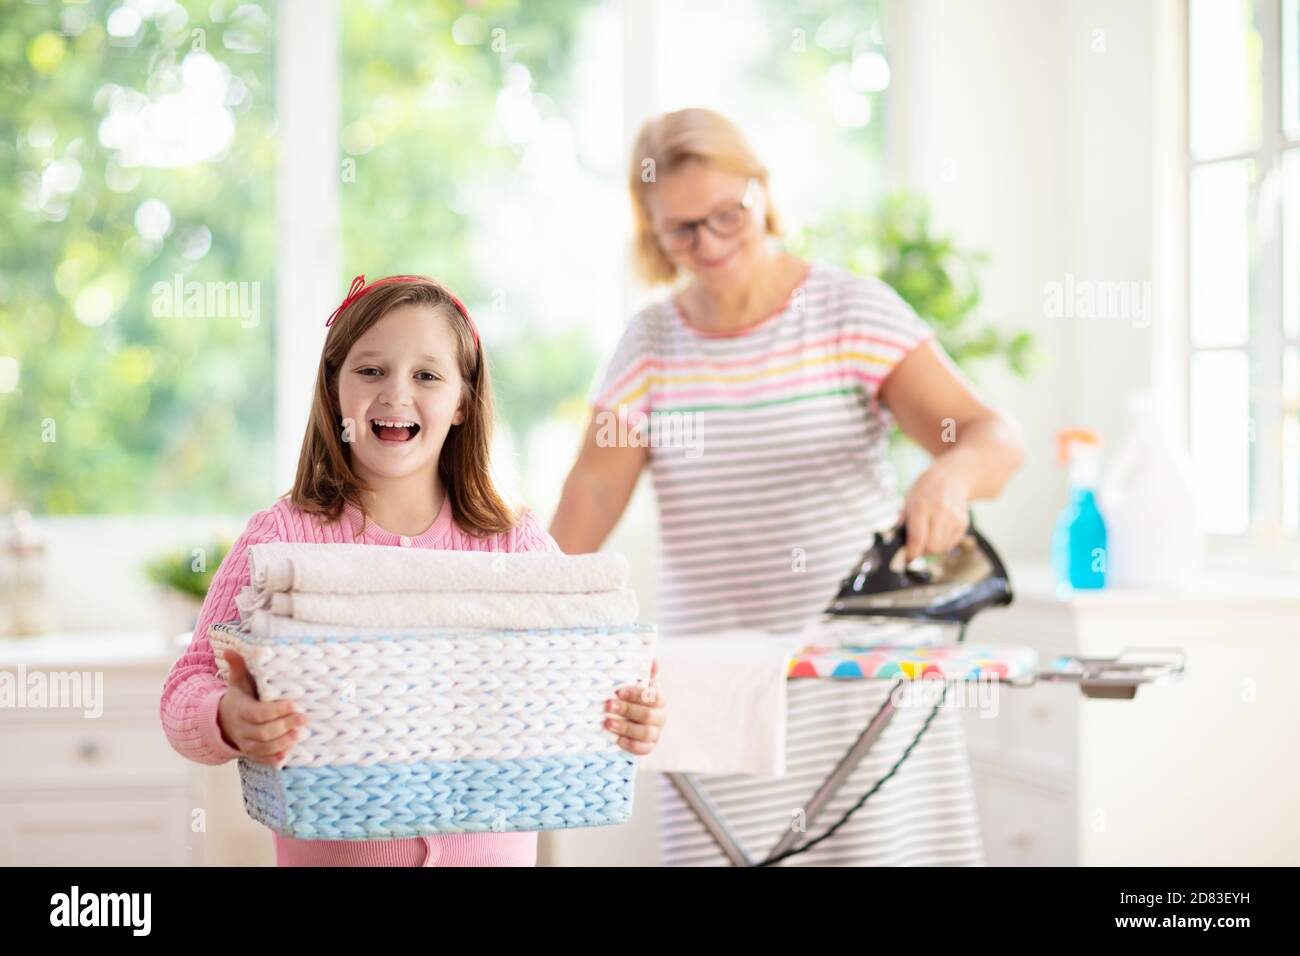 Woman and child ironing clothes. Mother and daughter folding clothes at iron board. Mom and kid cleaning house. Home chores. Stock Photo